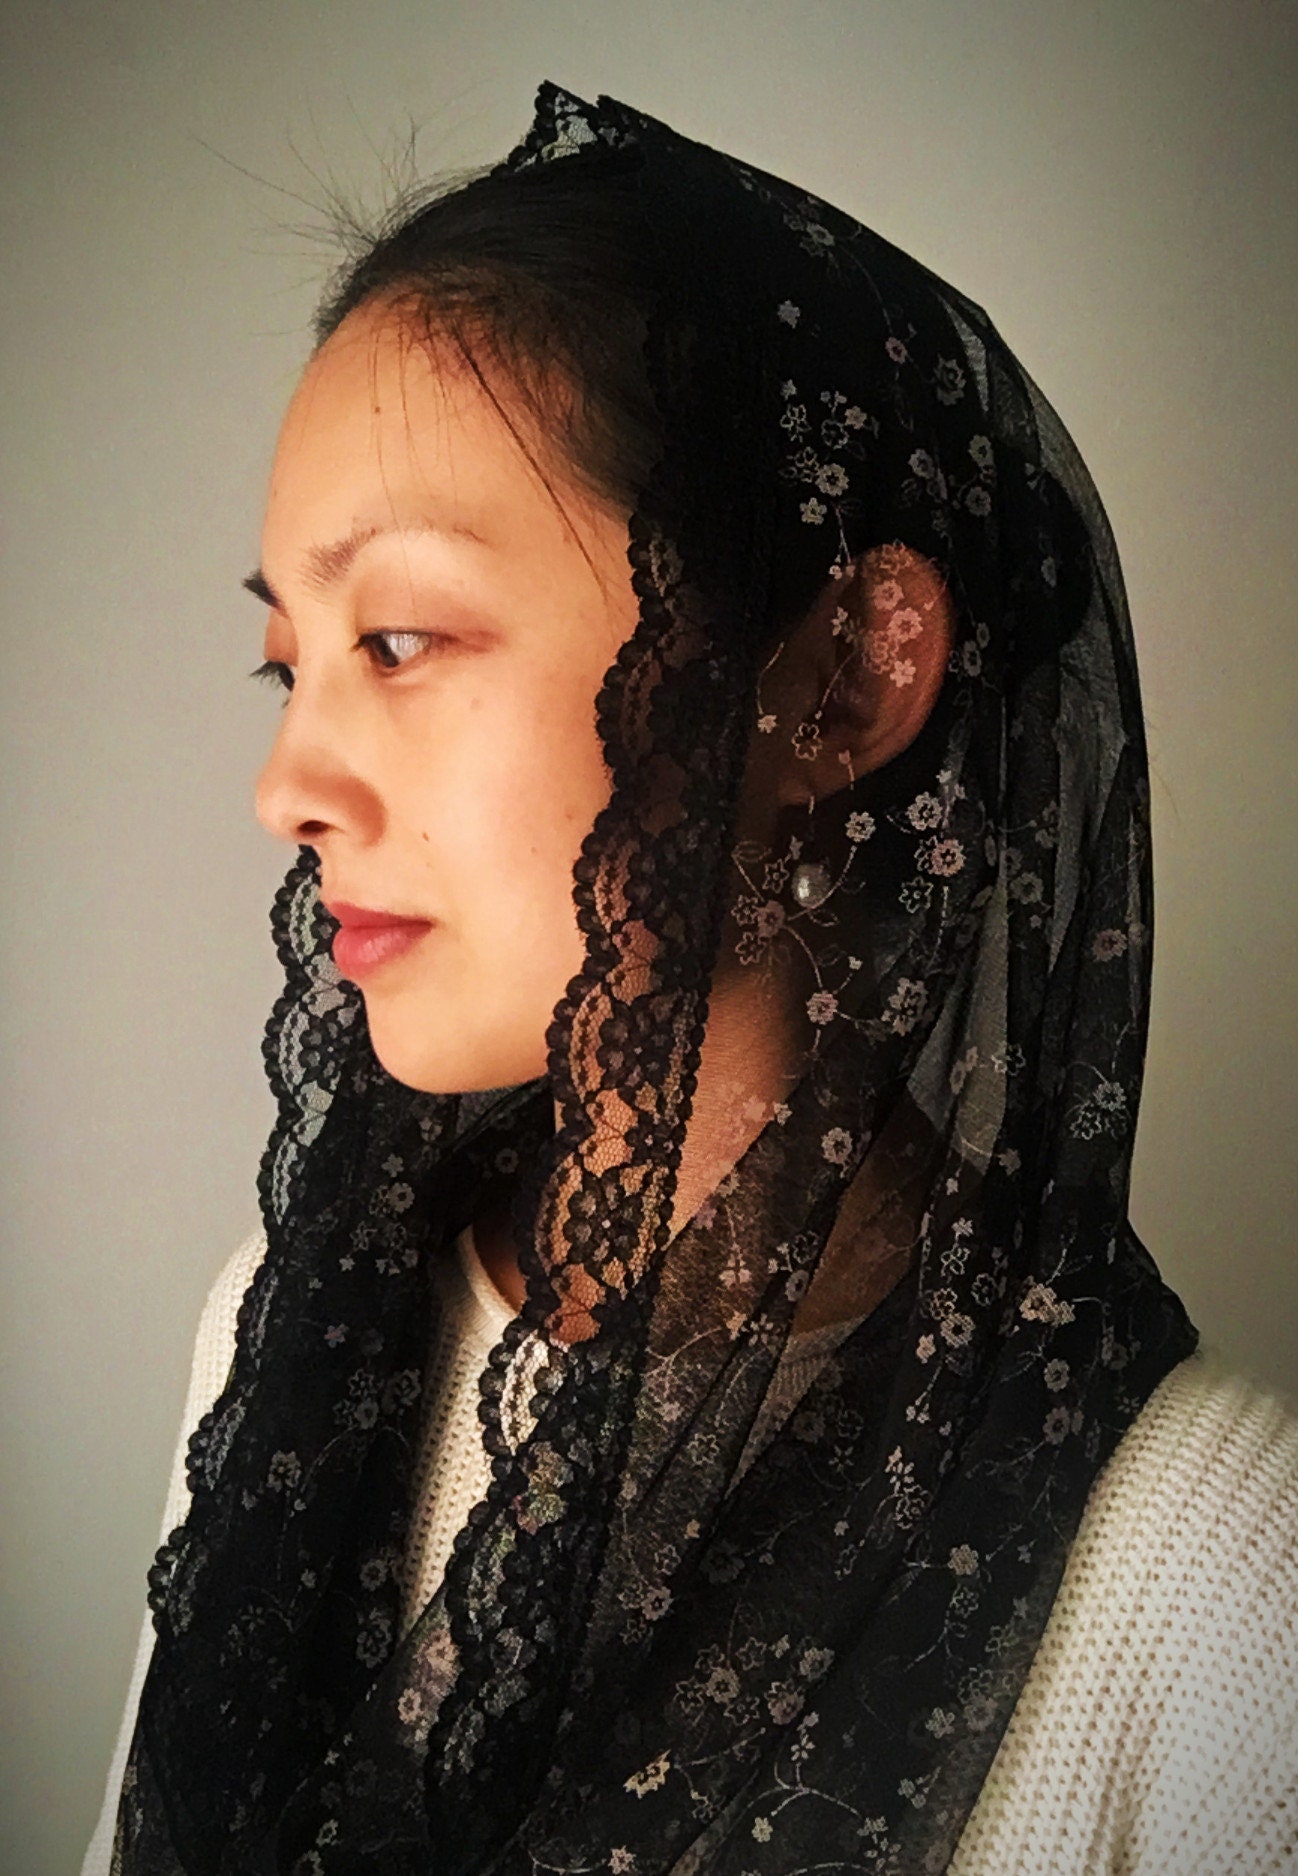 Mantveil Catholic Chapel Veil for Women: Traditional Floral Embroidered Lace Mantilla Church Veils Latin Mass Head Covering